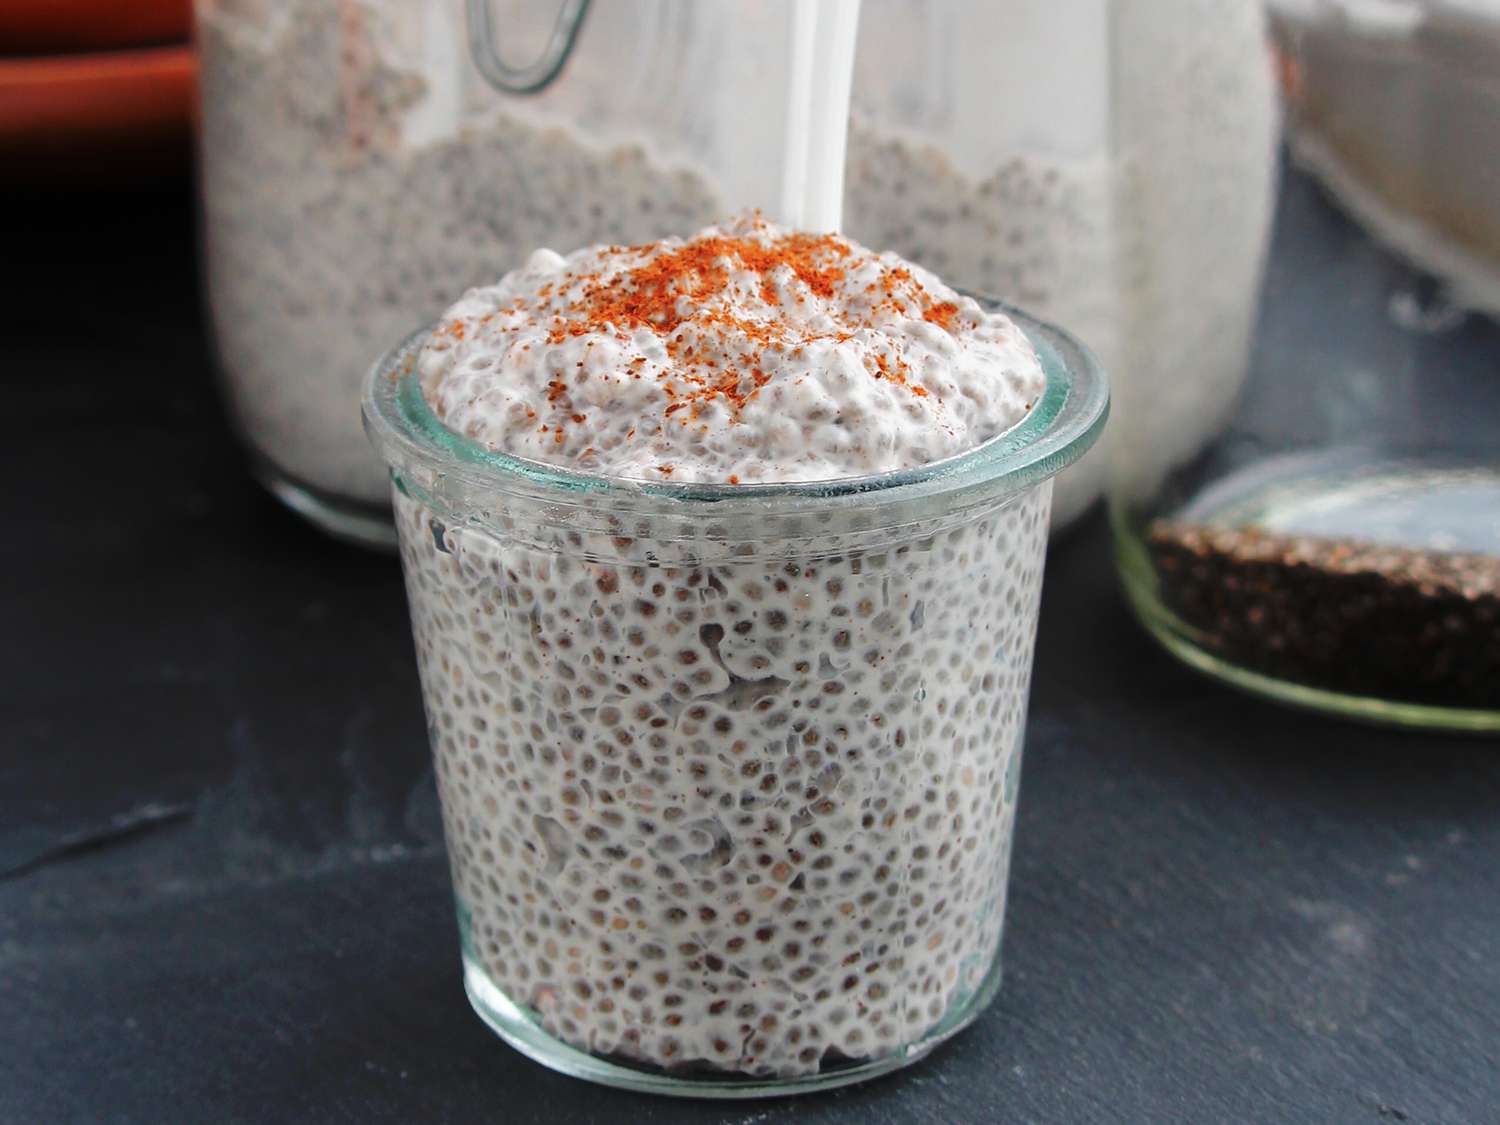 Close up view of a glass with chia coconut pudding garnished with cinnamon